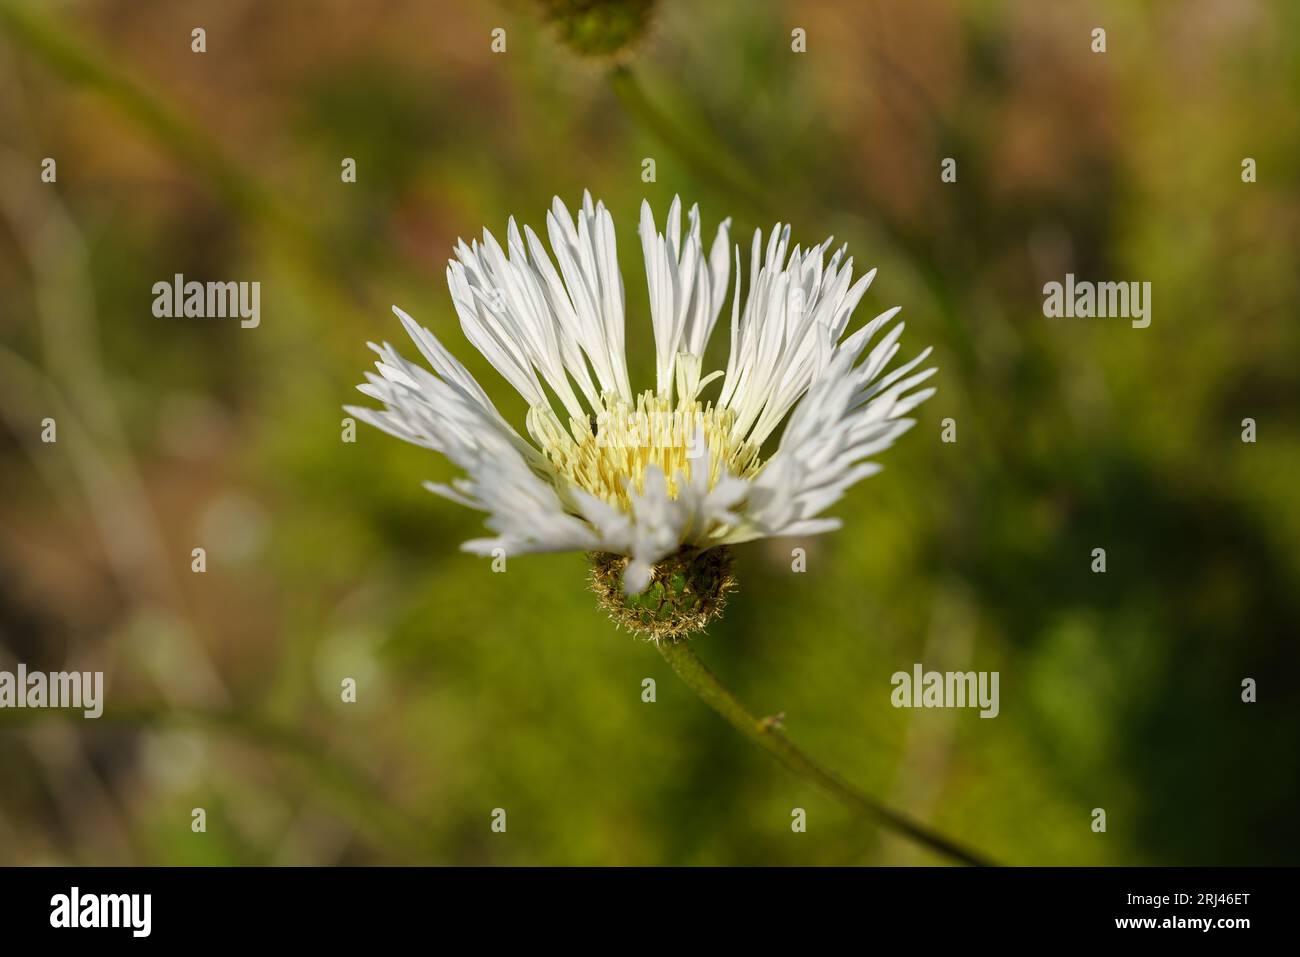 A close-up of a white Centaurea chilensis flower against a softly blurred background Stock Photo